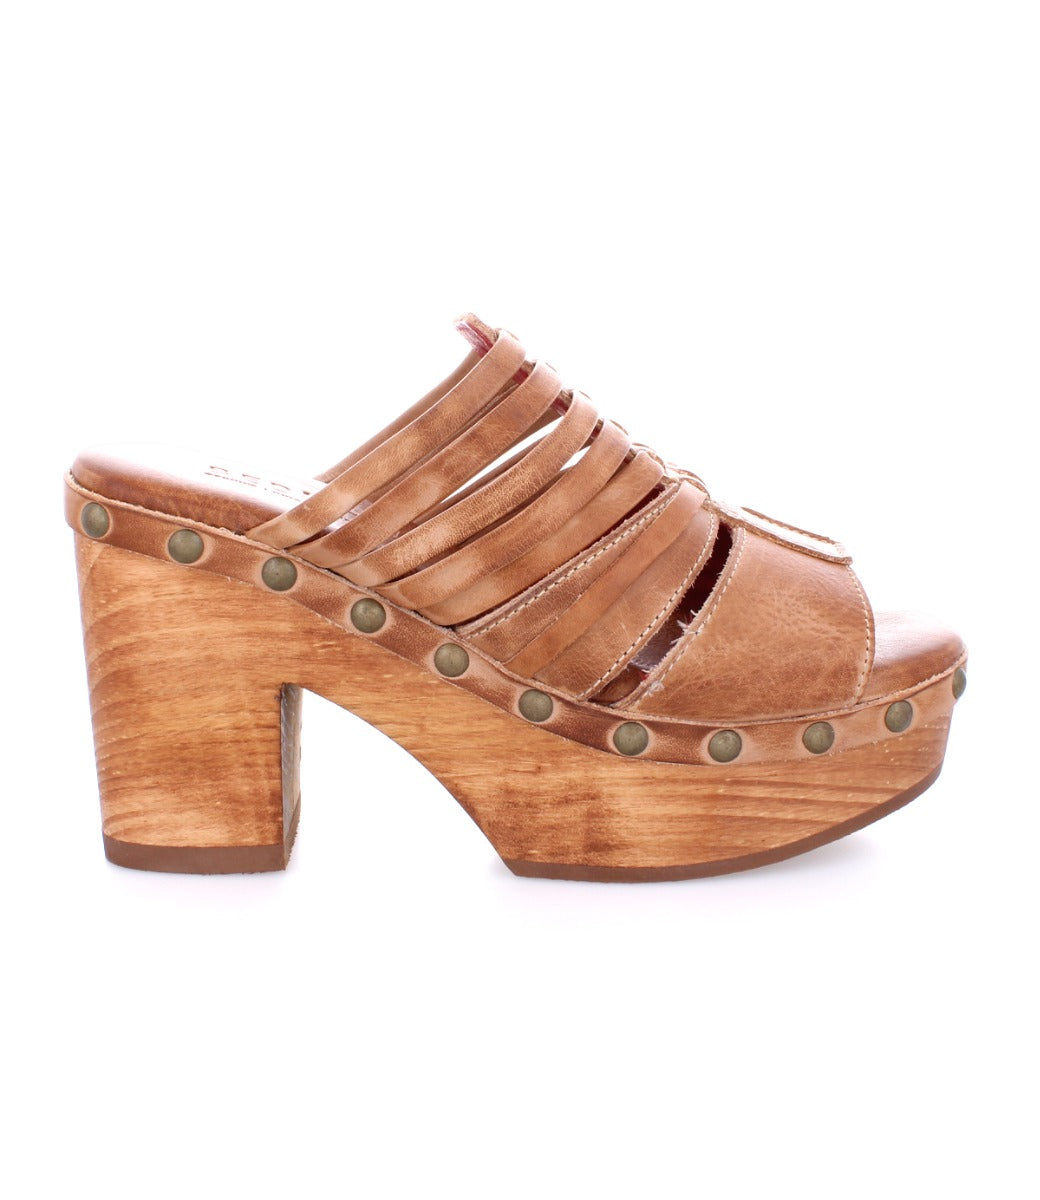 A women's sandal with a wooden heel and straps, the Shantel by Bed Stu.